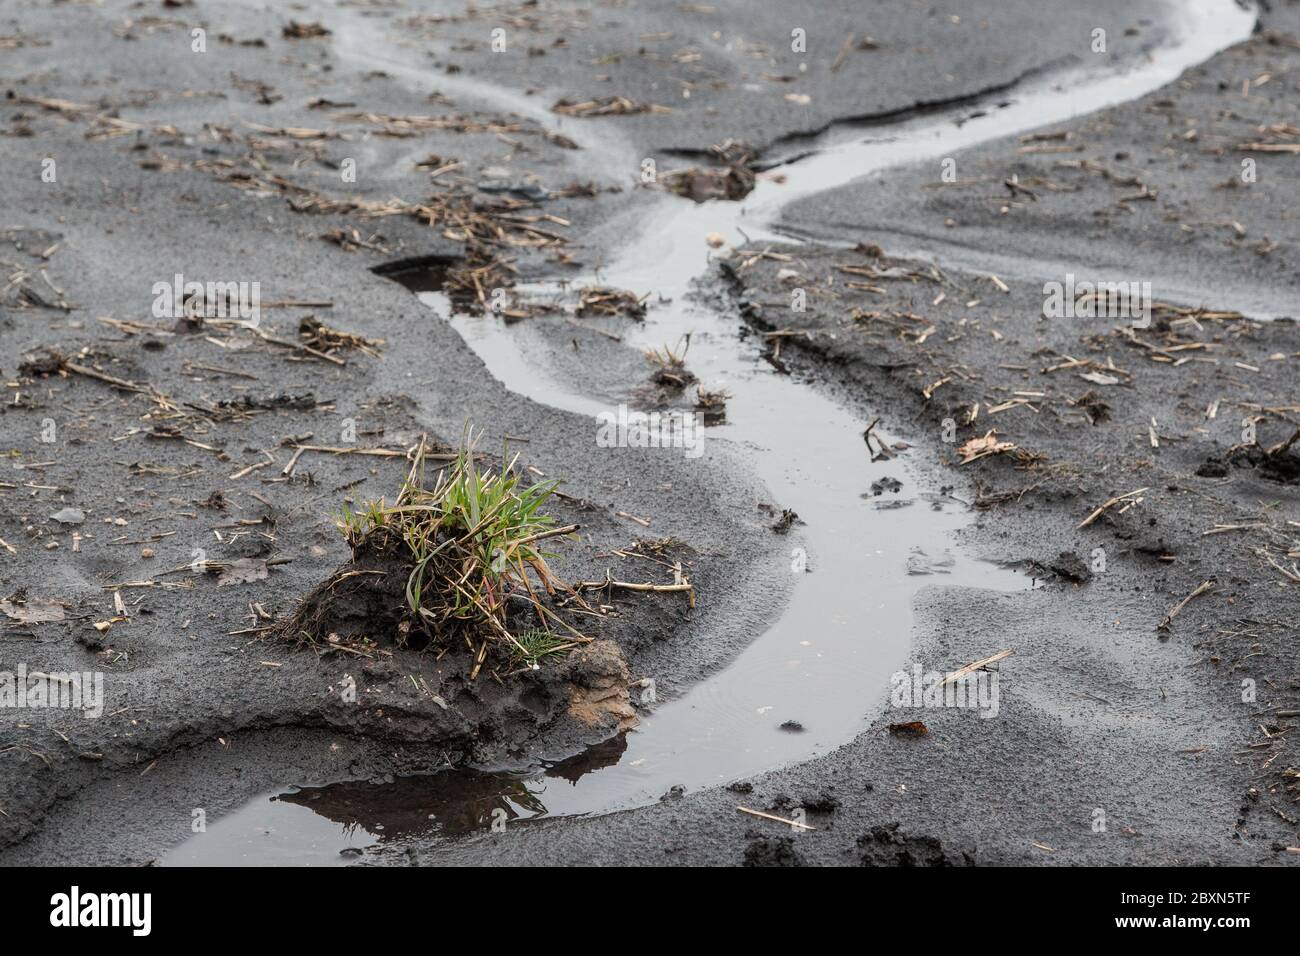 Deep rivulets run through the field after heavy rain and wash away valuable soil. Stock Photo